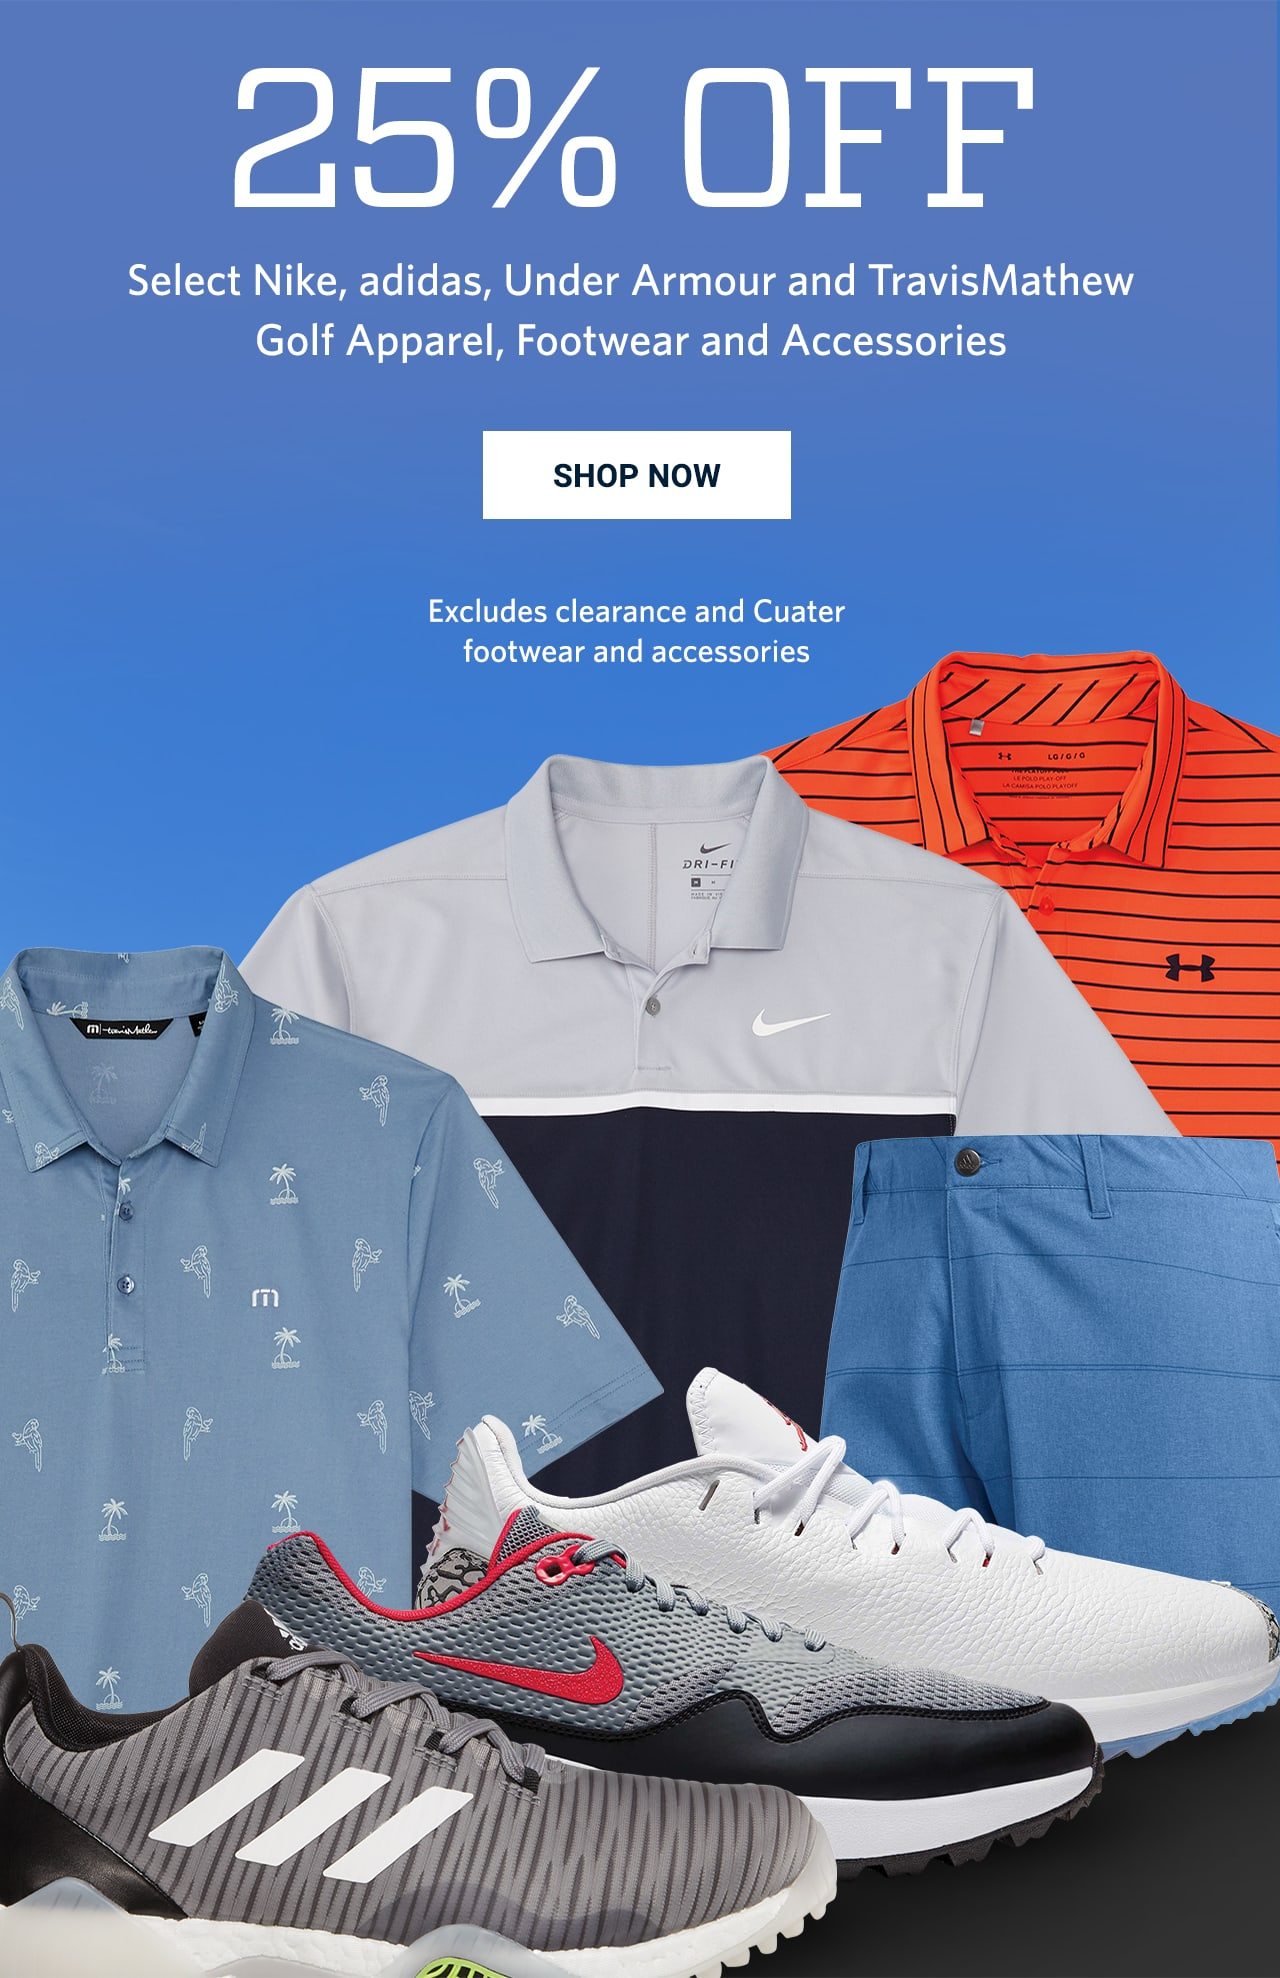 25% Off. Select nike, adidas, under armour and travismathew golf apparel, footwear and accessories. Excludes clearance and cuater footwear and accessories. Shop now.